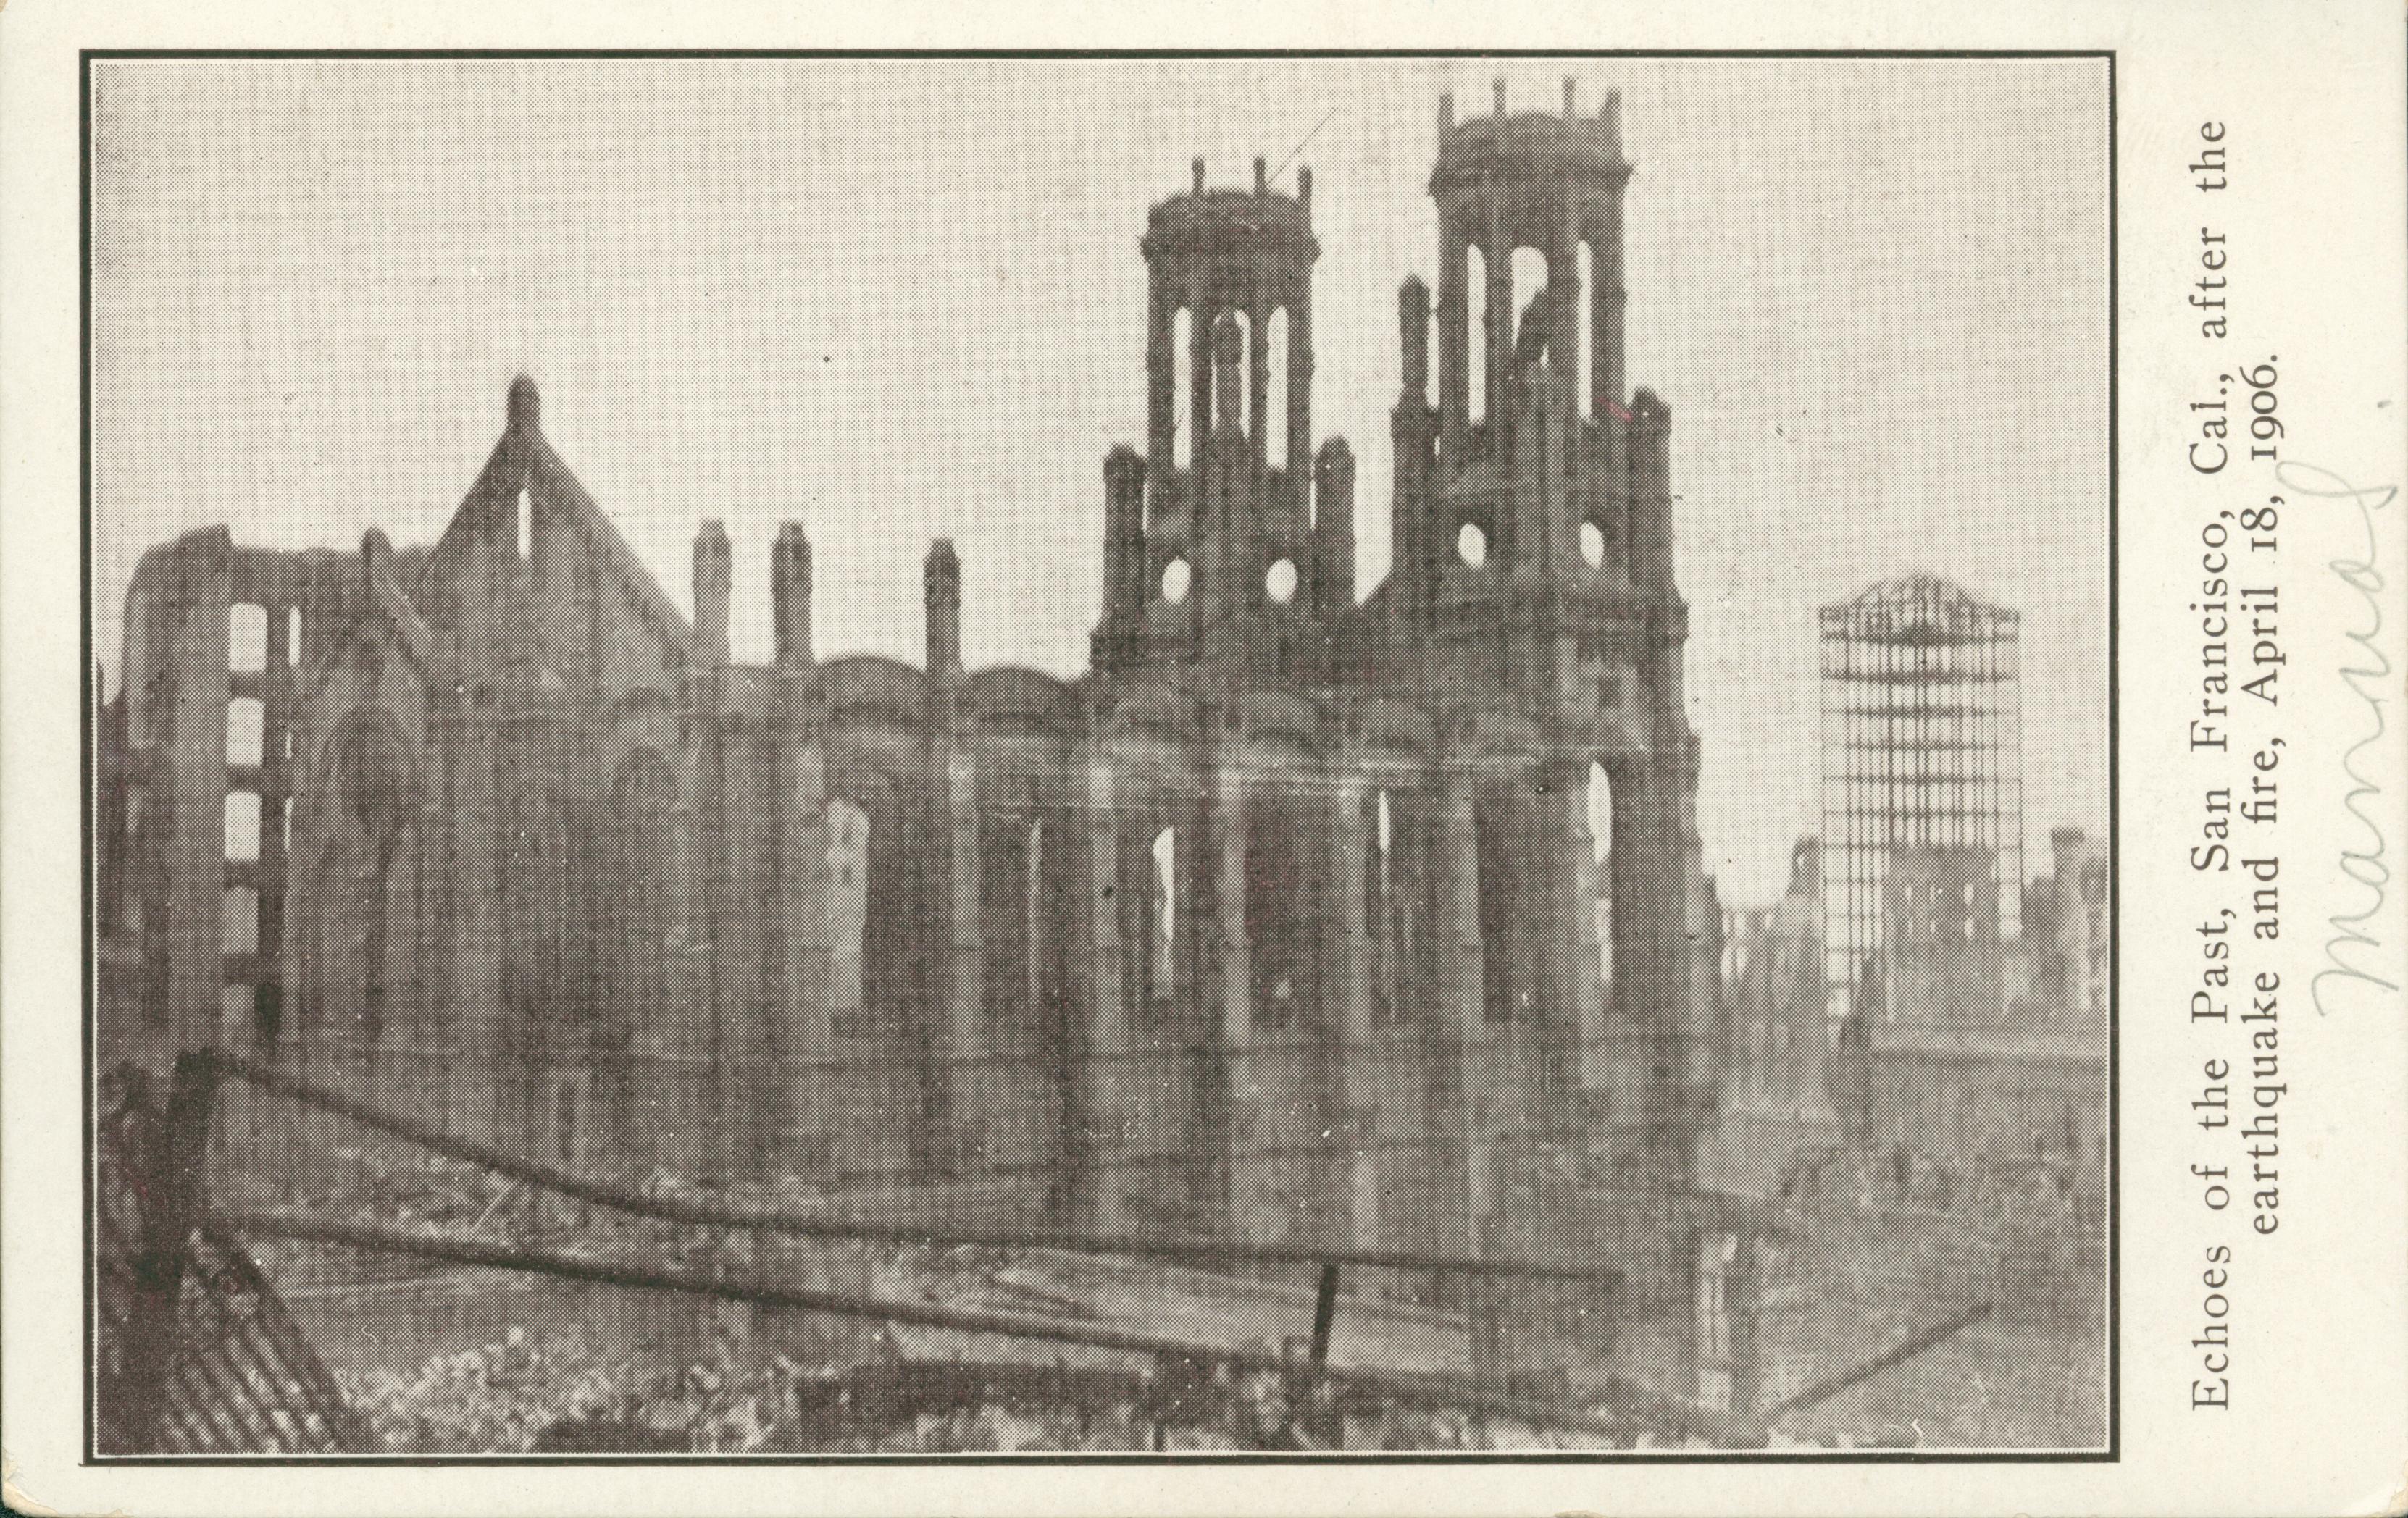 Shows a view of the ruins of Temple Emanuel